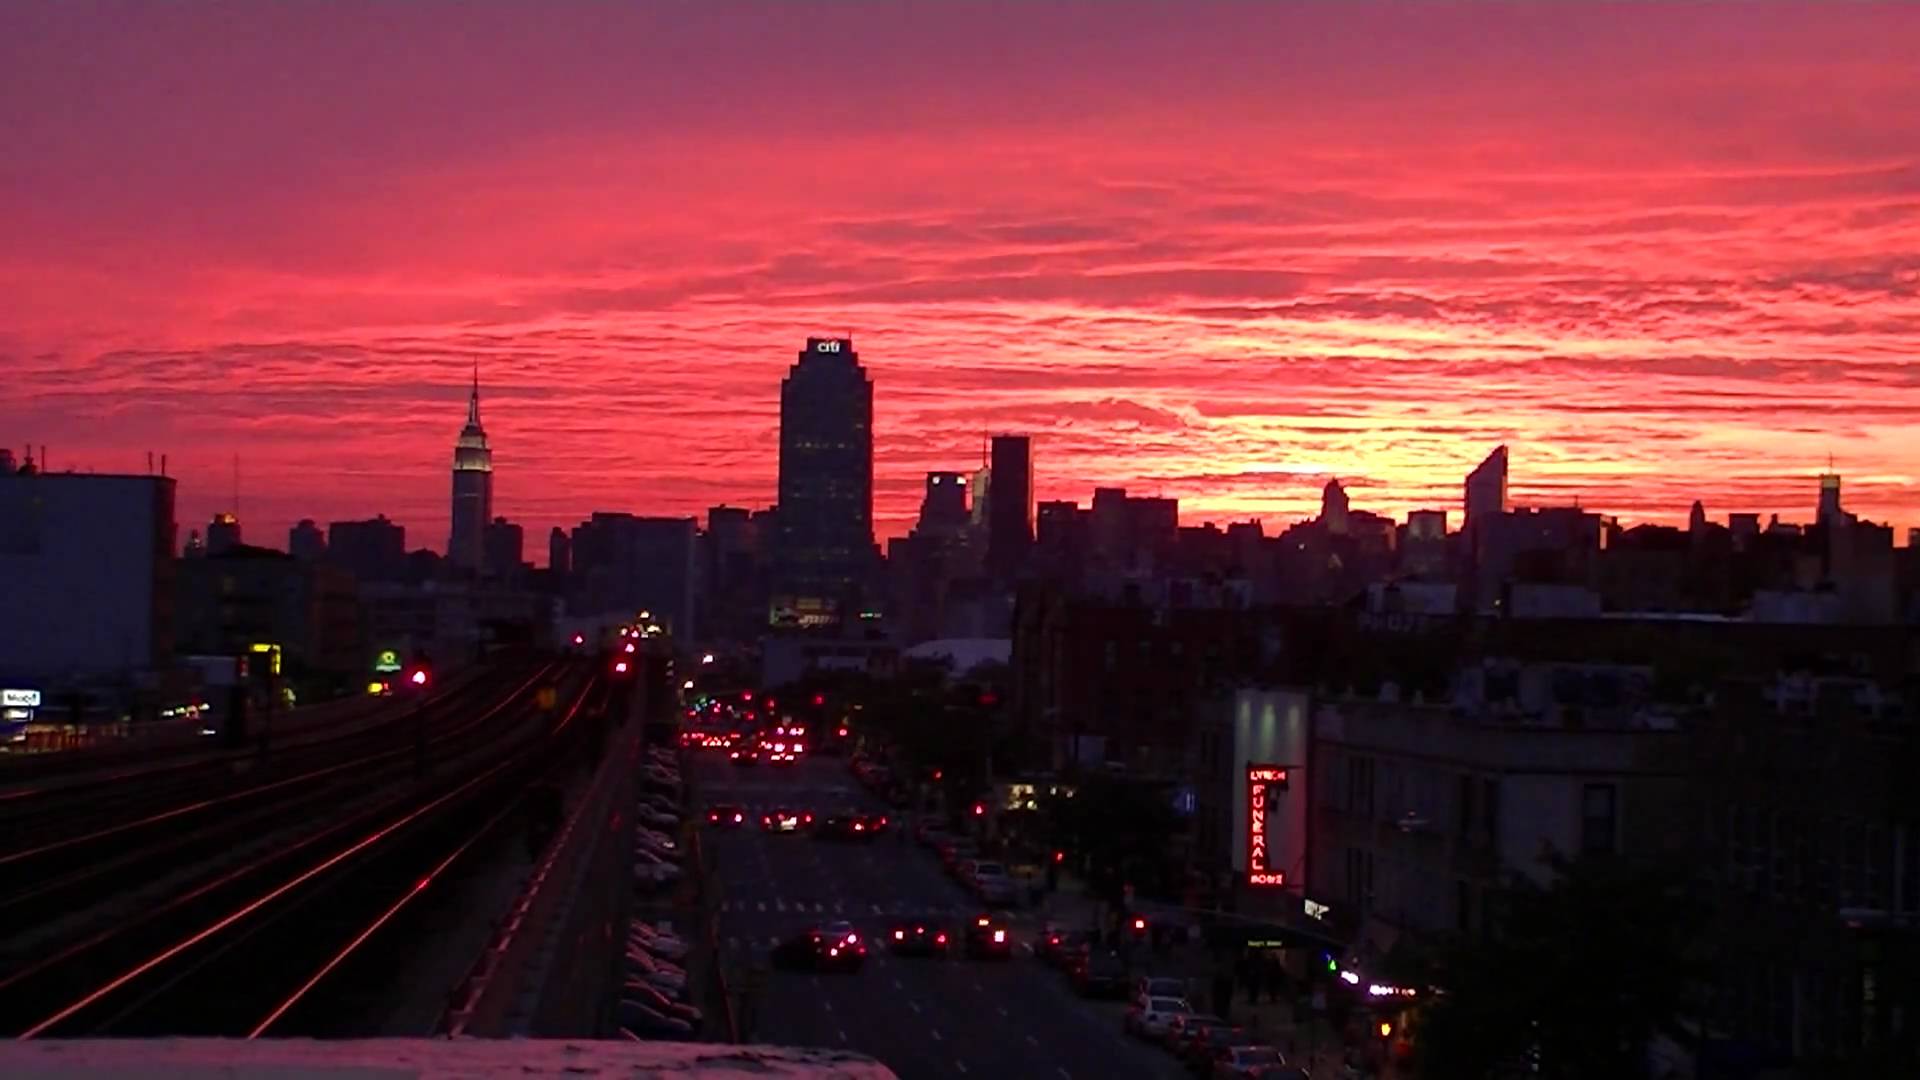 Timelapse of a Sunset in Sunnyside, Queens.